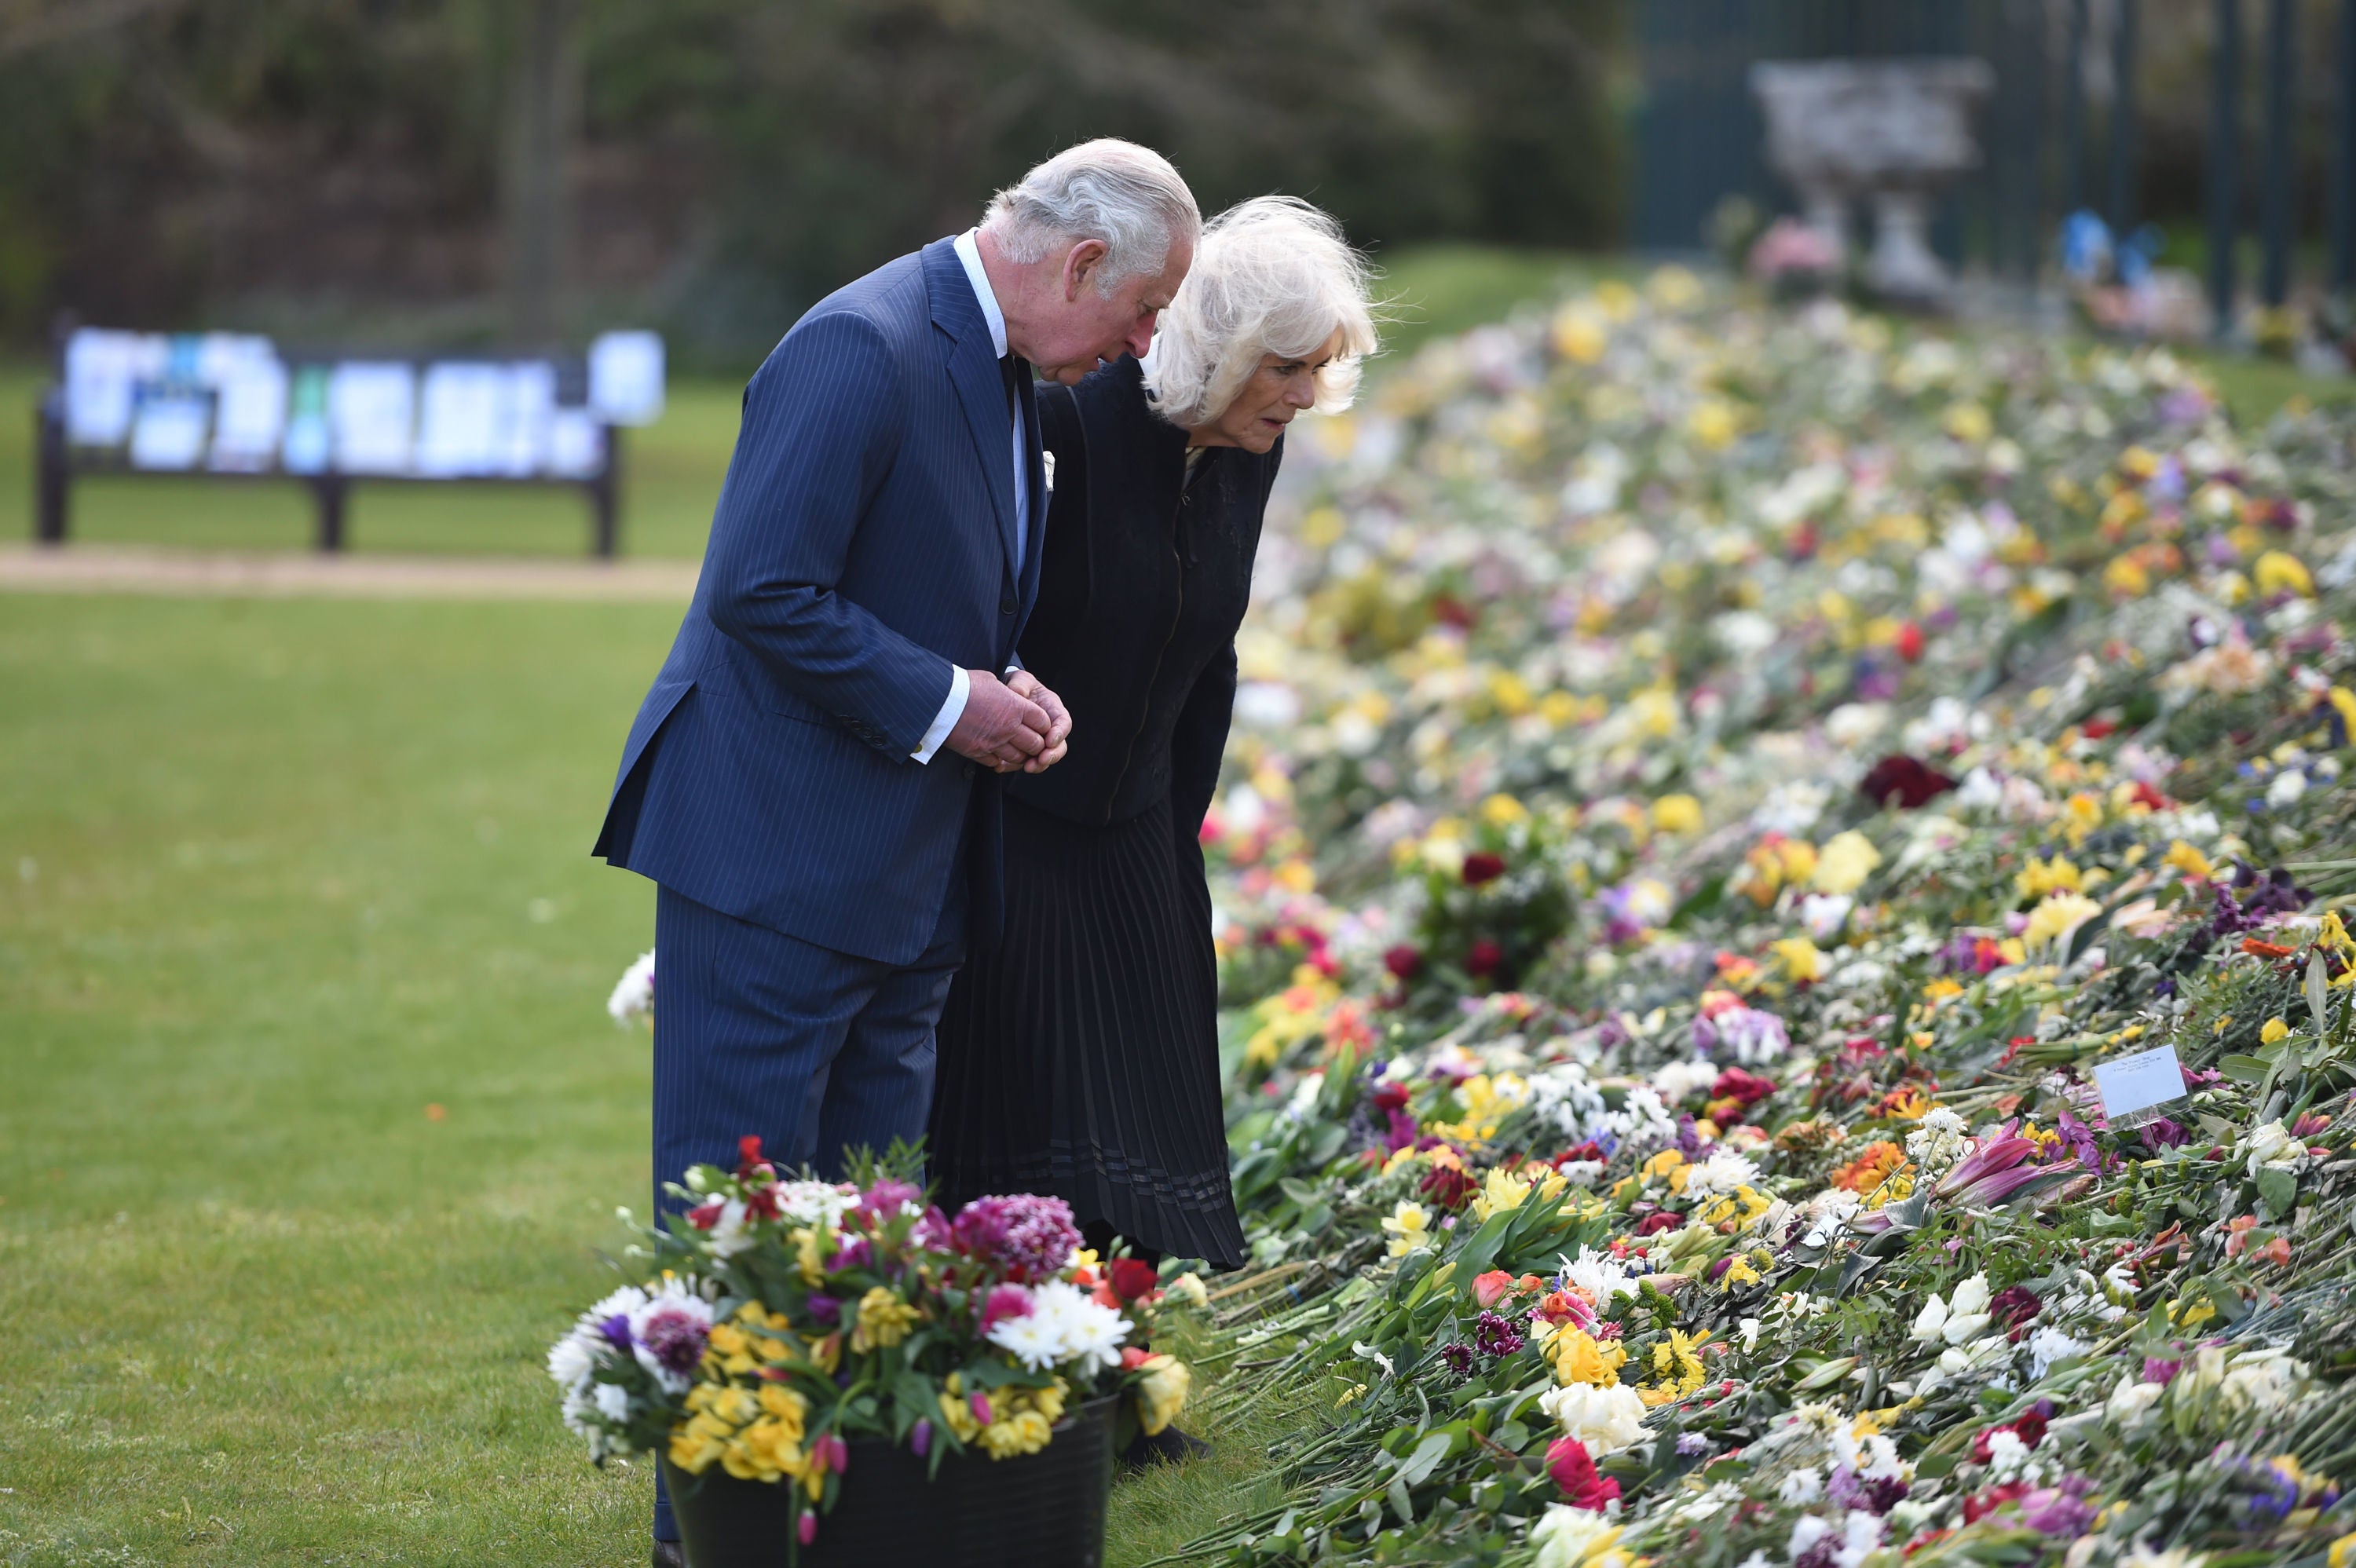 The Prince of Wales and the Duchess of Cornwall visit the gardens of Marlborough House, London, to view the flowers and messages left by members of the public outside Buckingham Palace